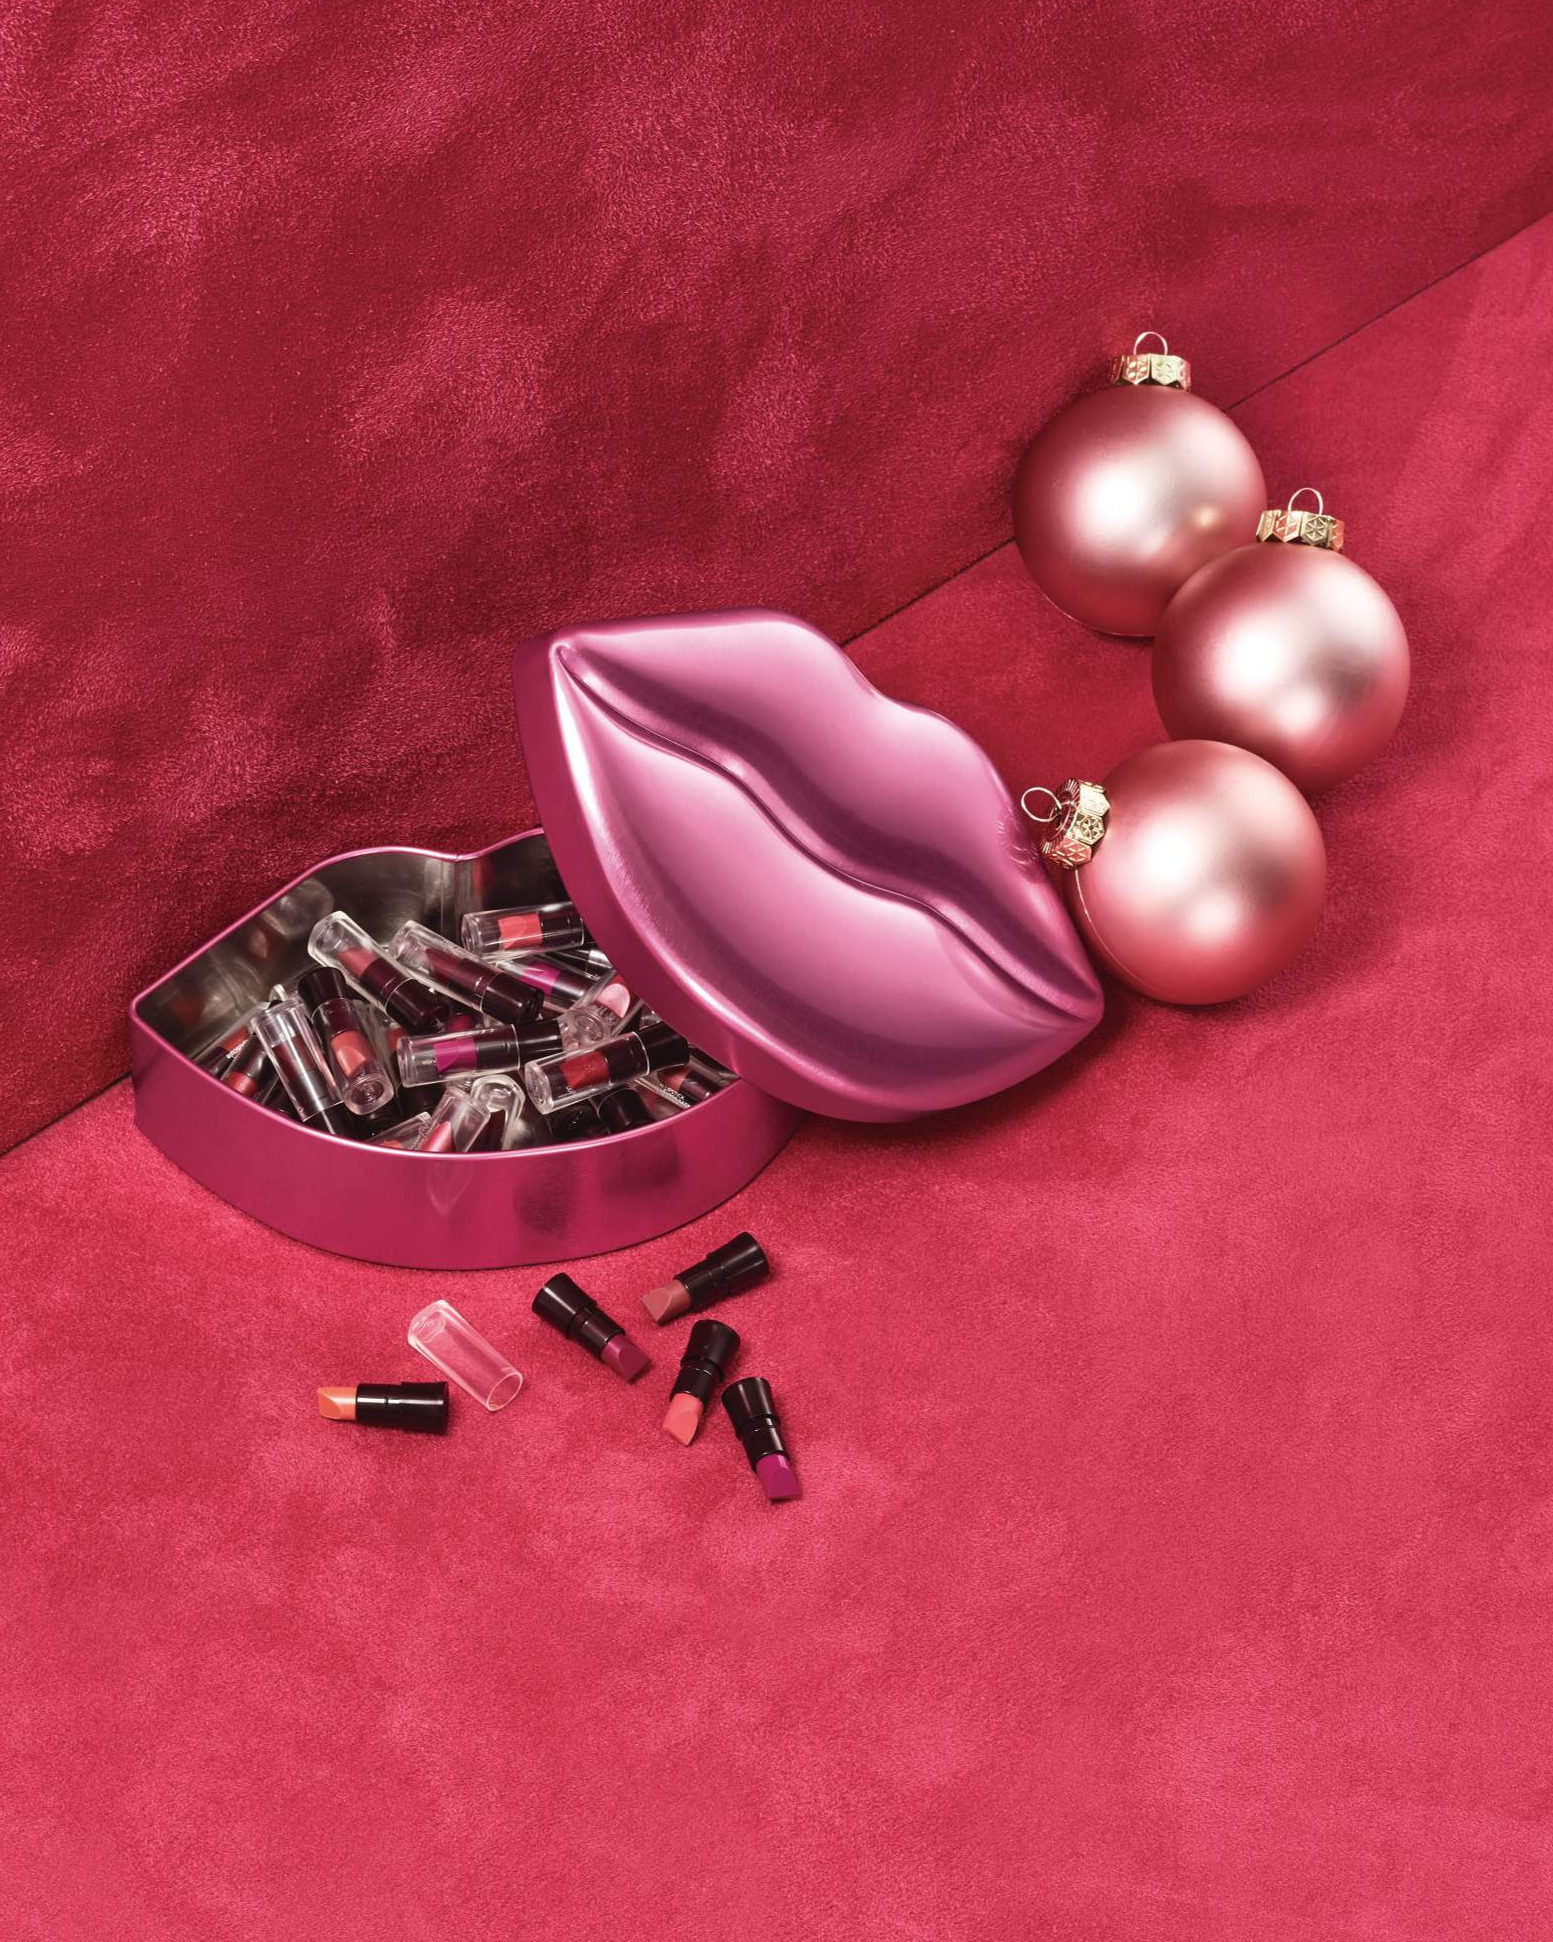 Avon USA on X: 30 of our best-selling fmg Glimmer Satin Lipstick shades in  minis, perfect for on-the-go or stocking stuffers! Shop the fmg Wish for a  Kiss set now. 🎄🎁✨  #